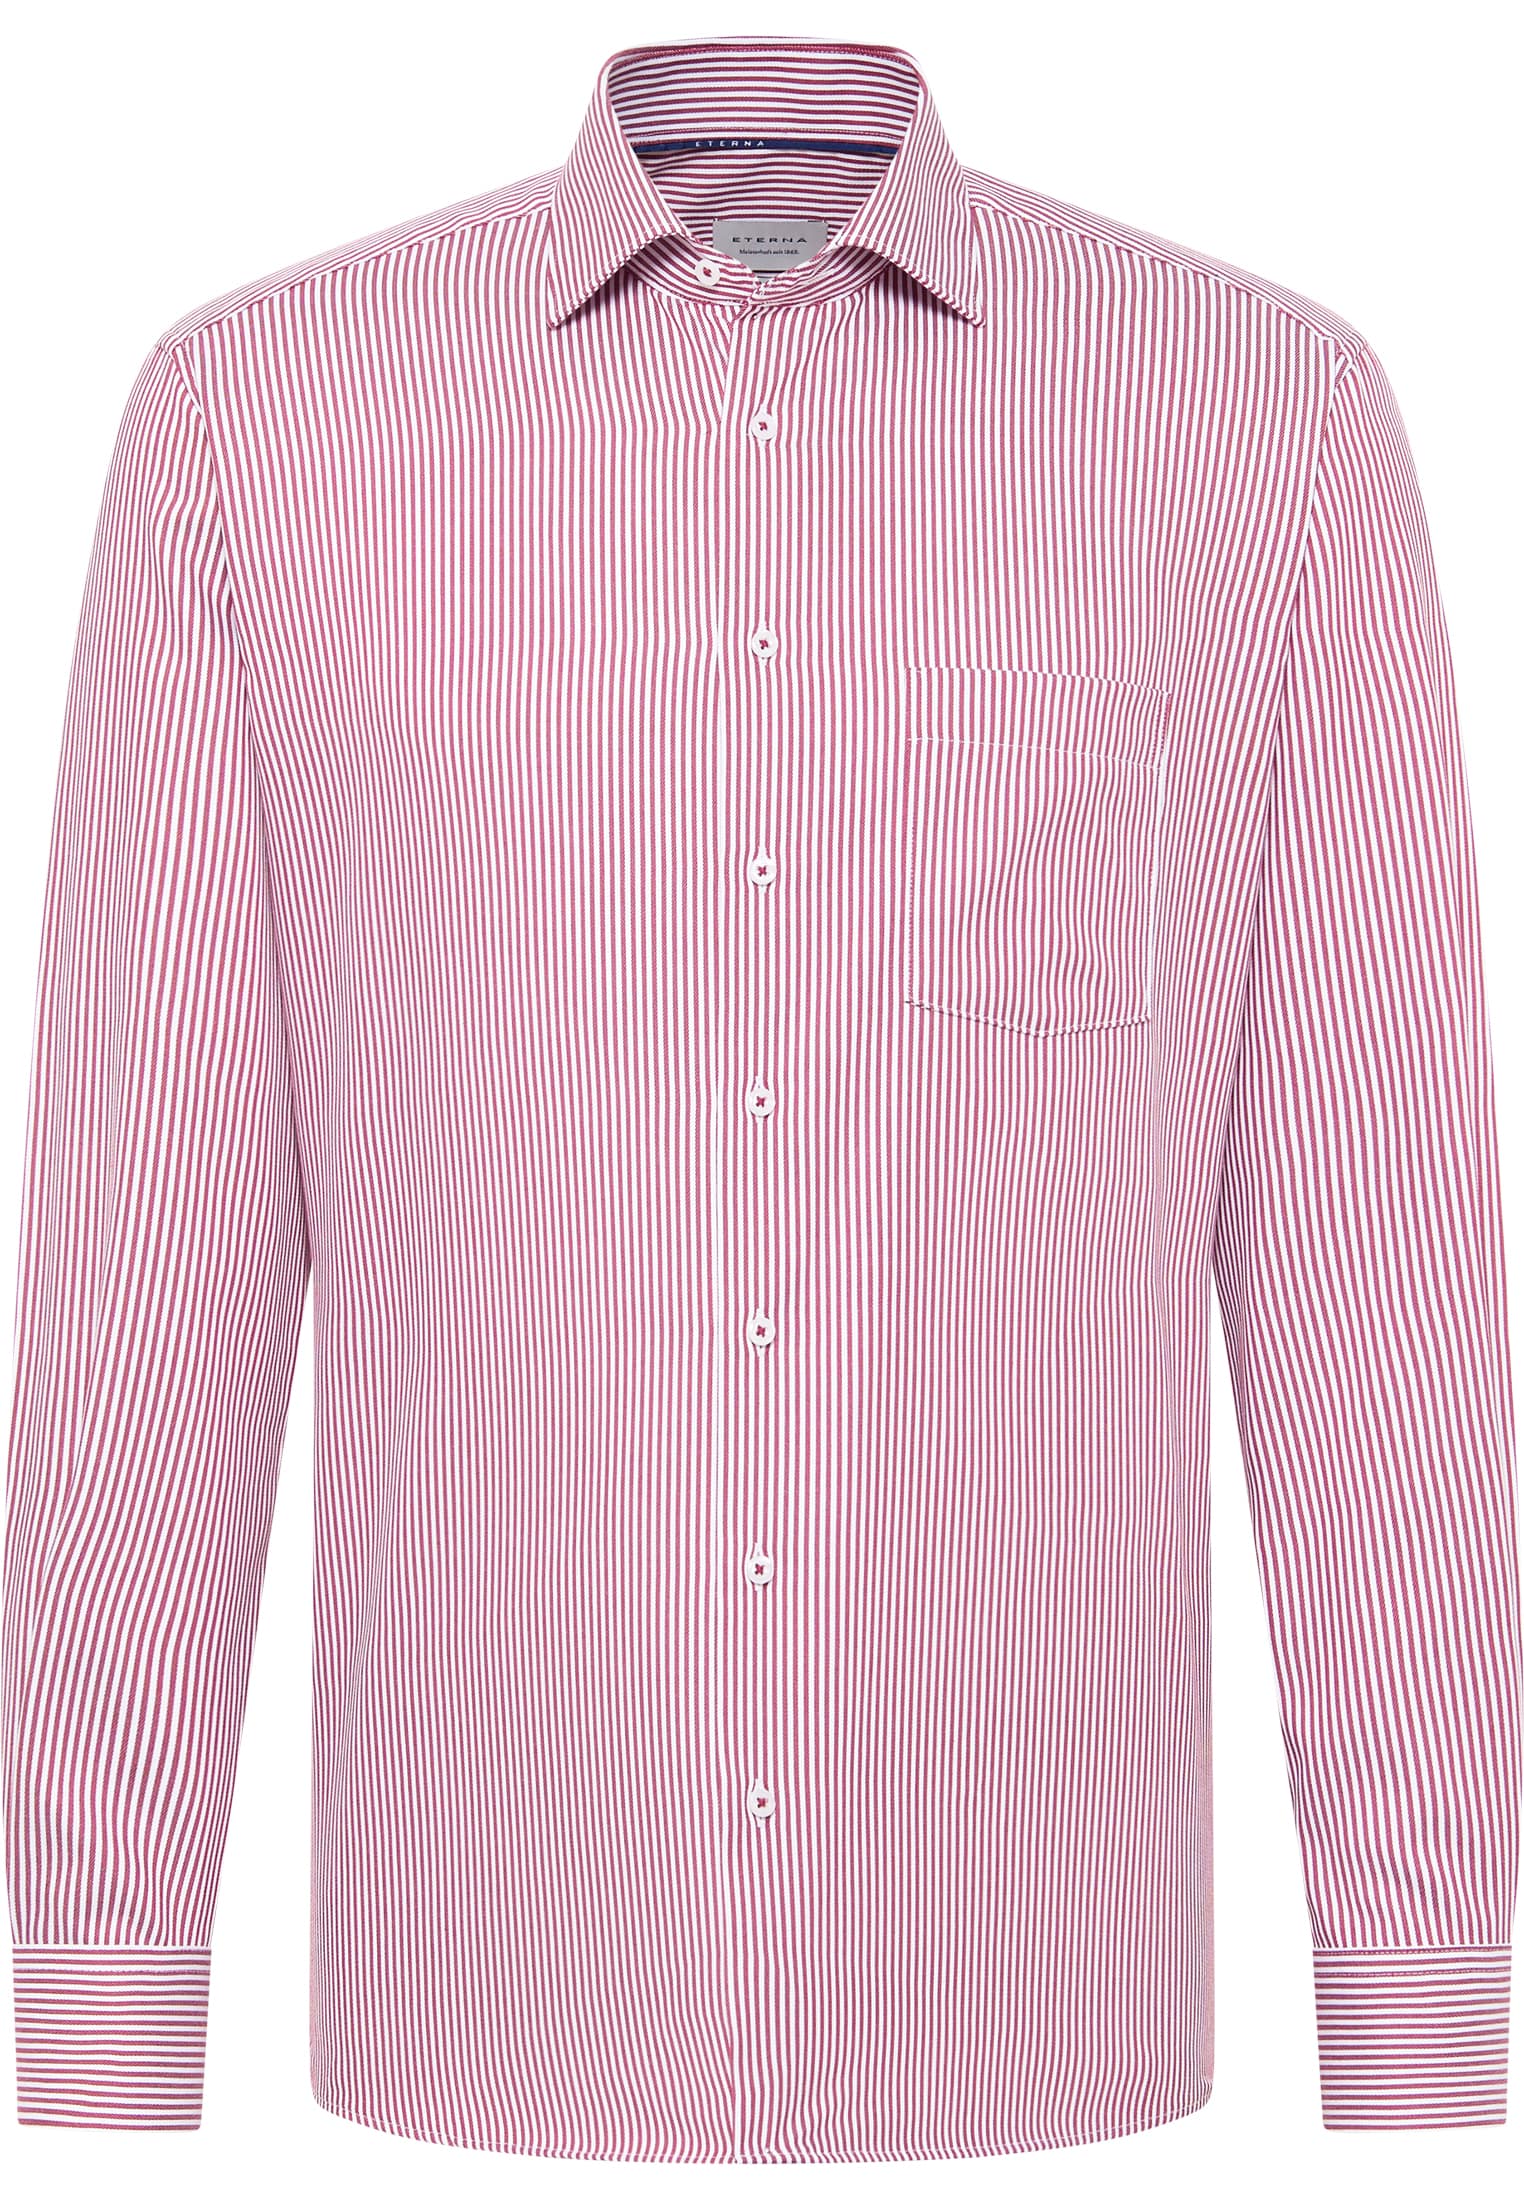 MODERN FIT Shirt in ruby striped